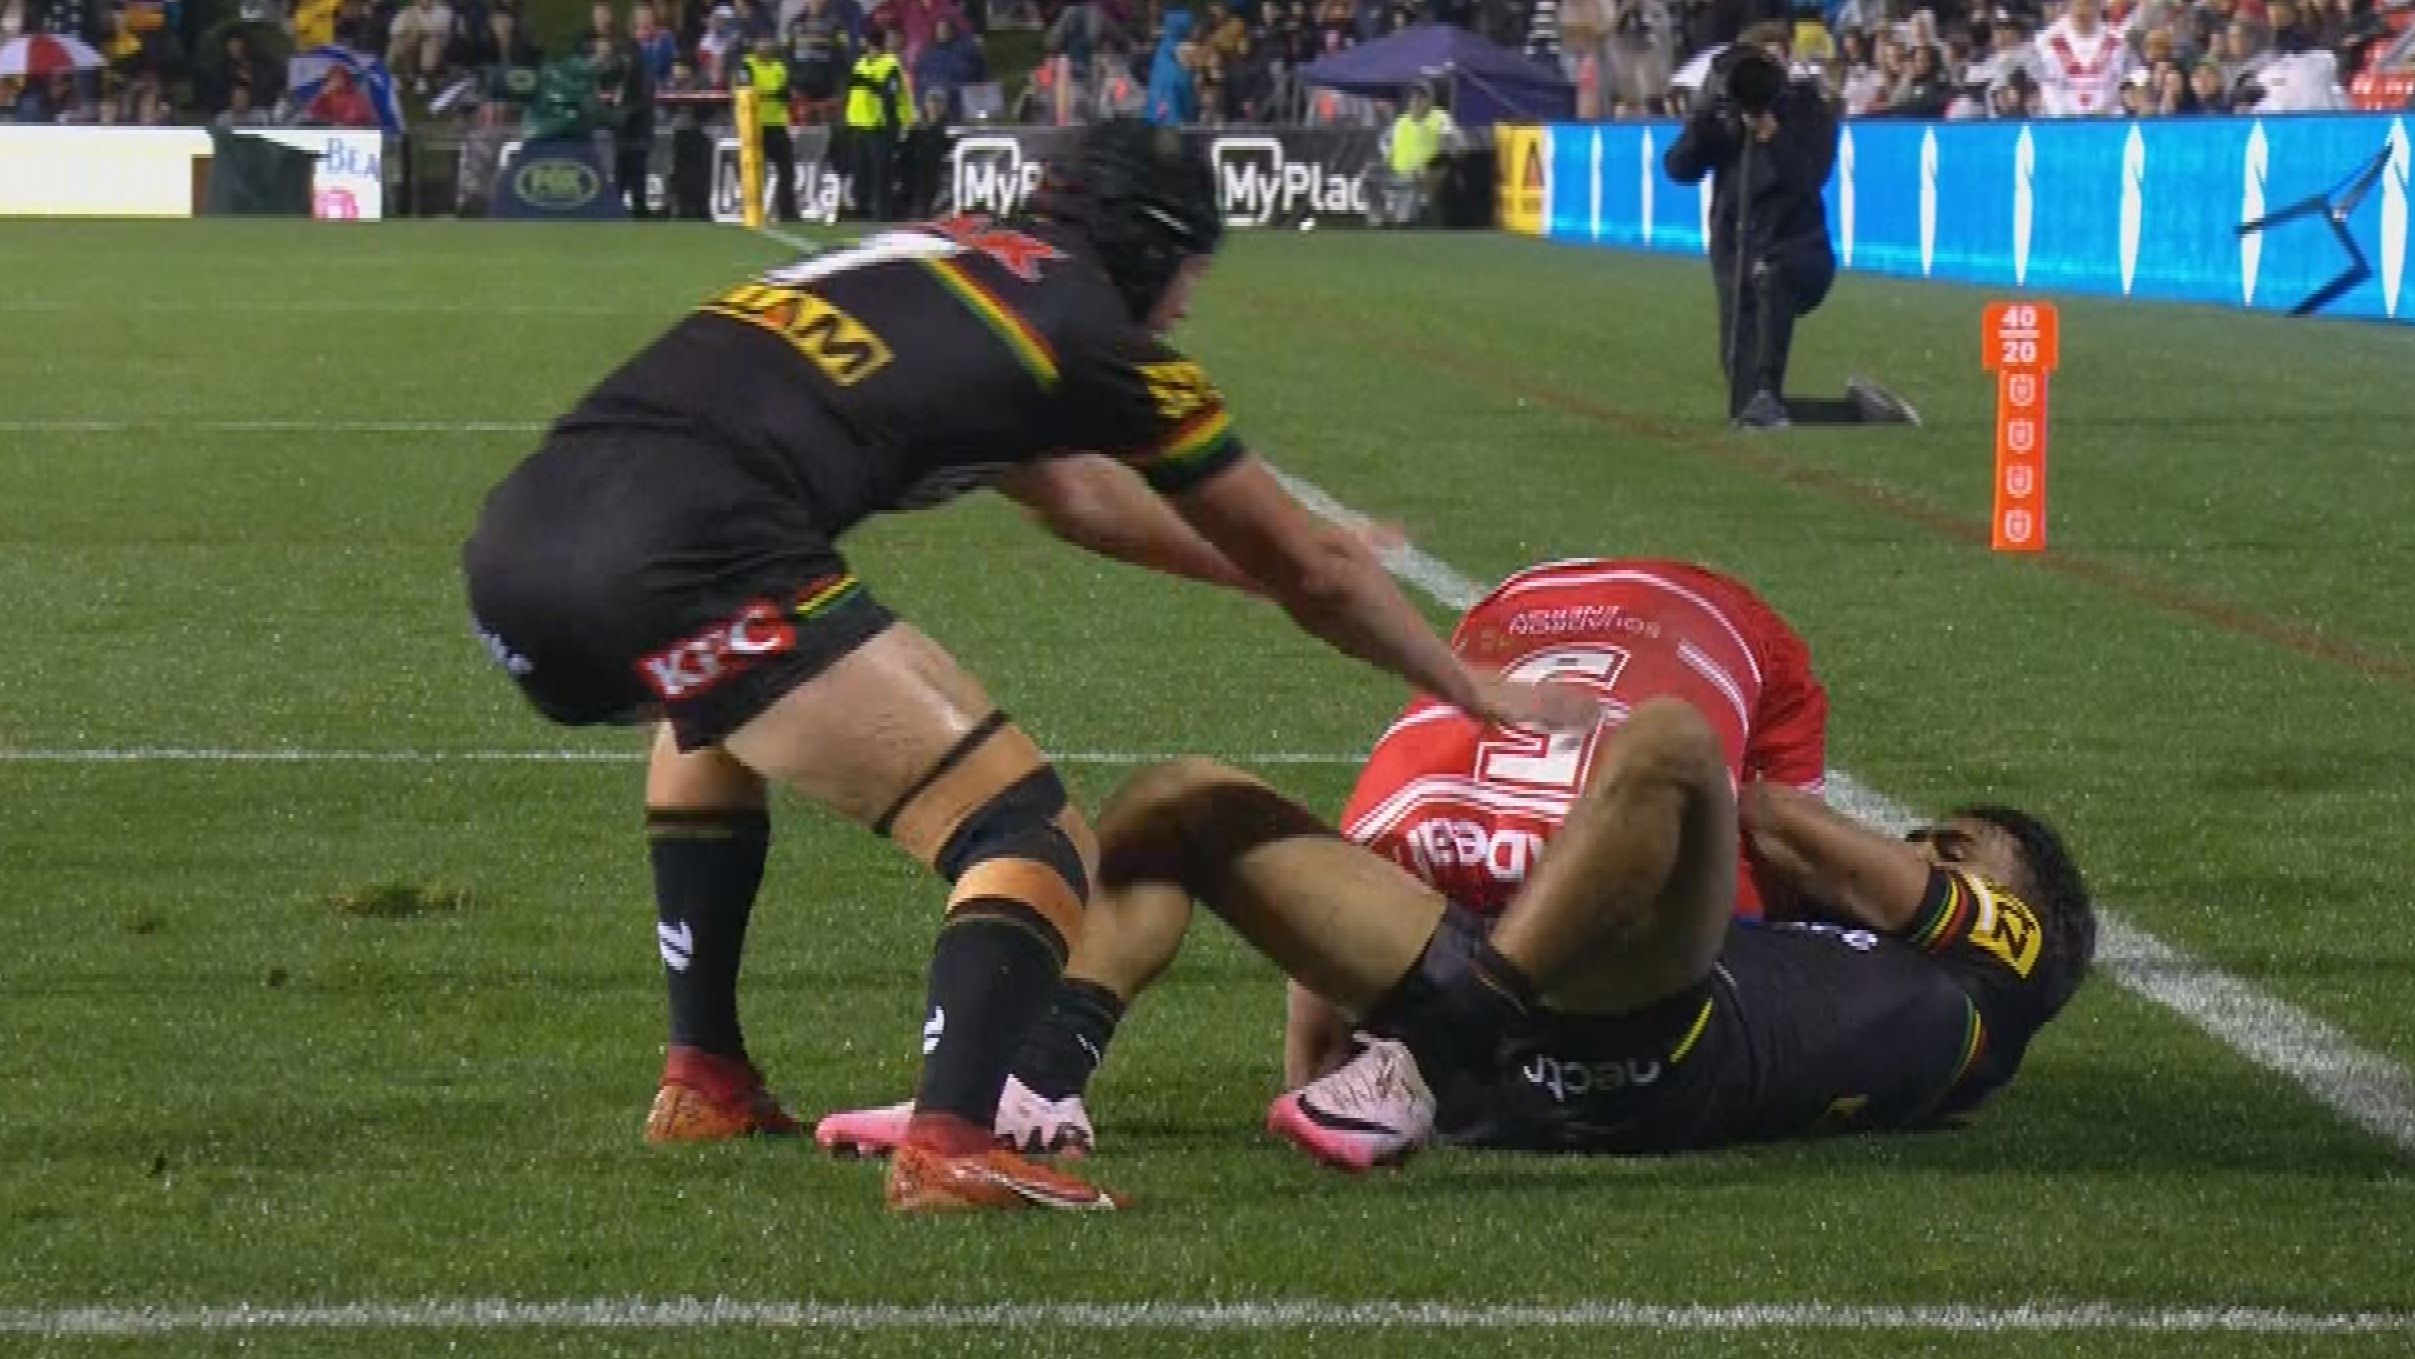 Daine Laurie made a try-saving tackle on Mathew Feagai in the opening minutes.